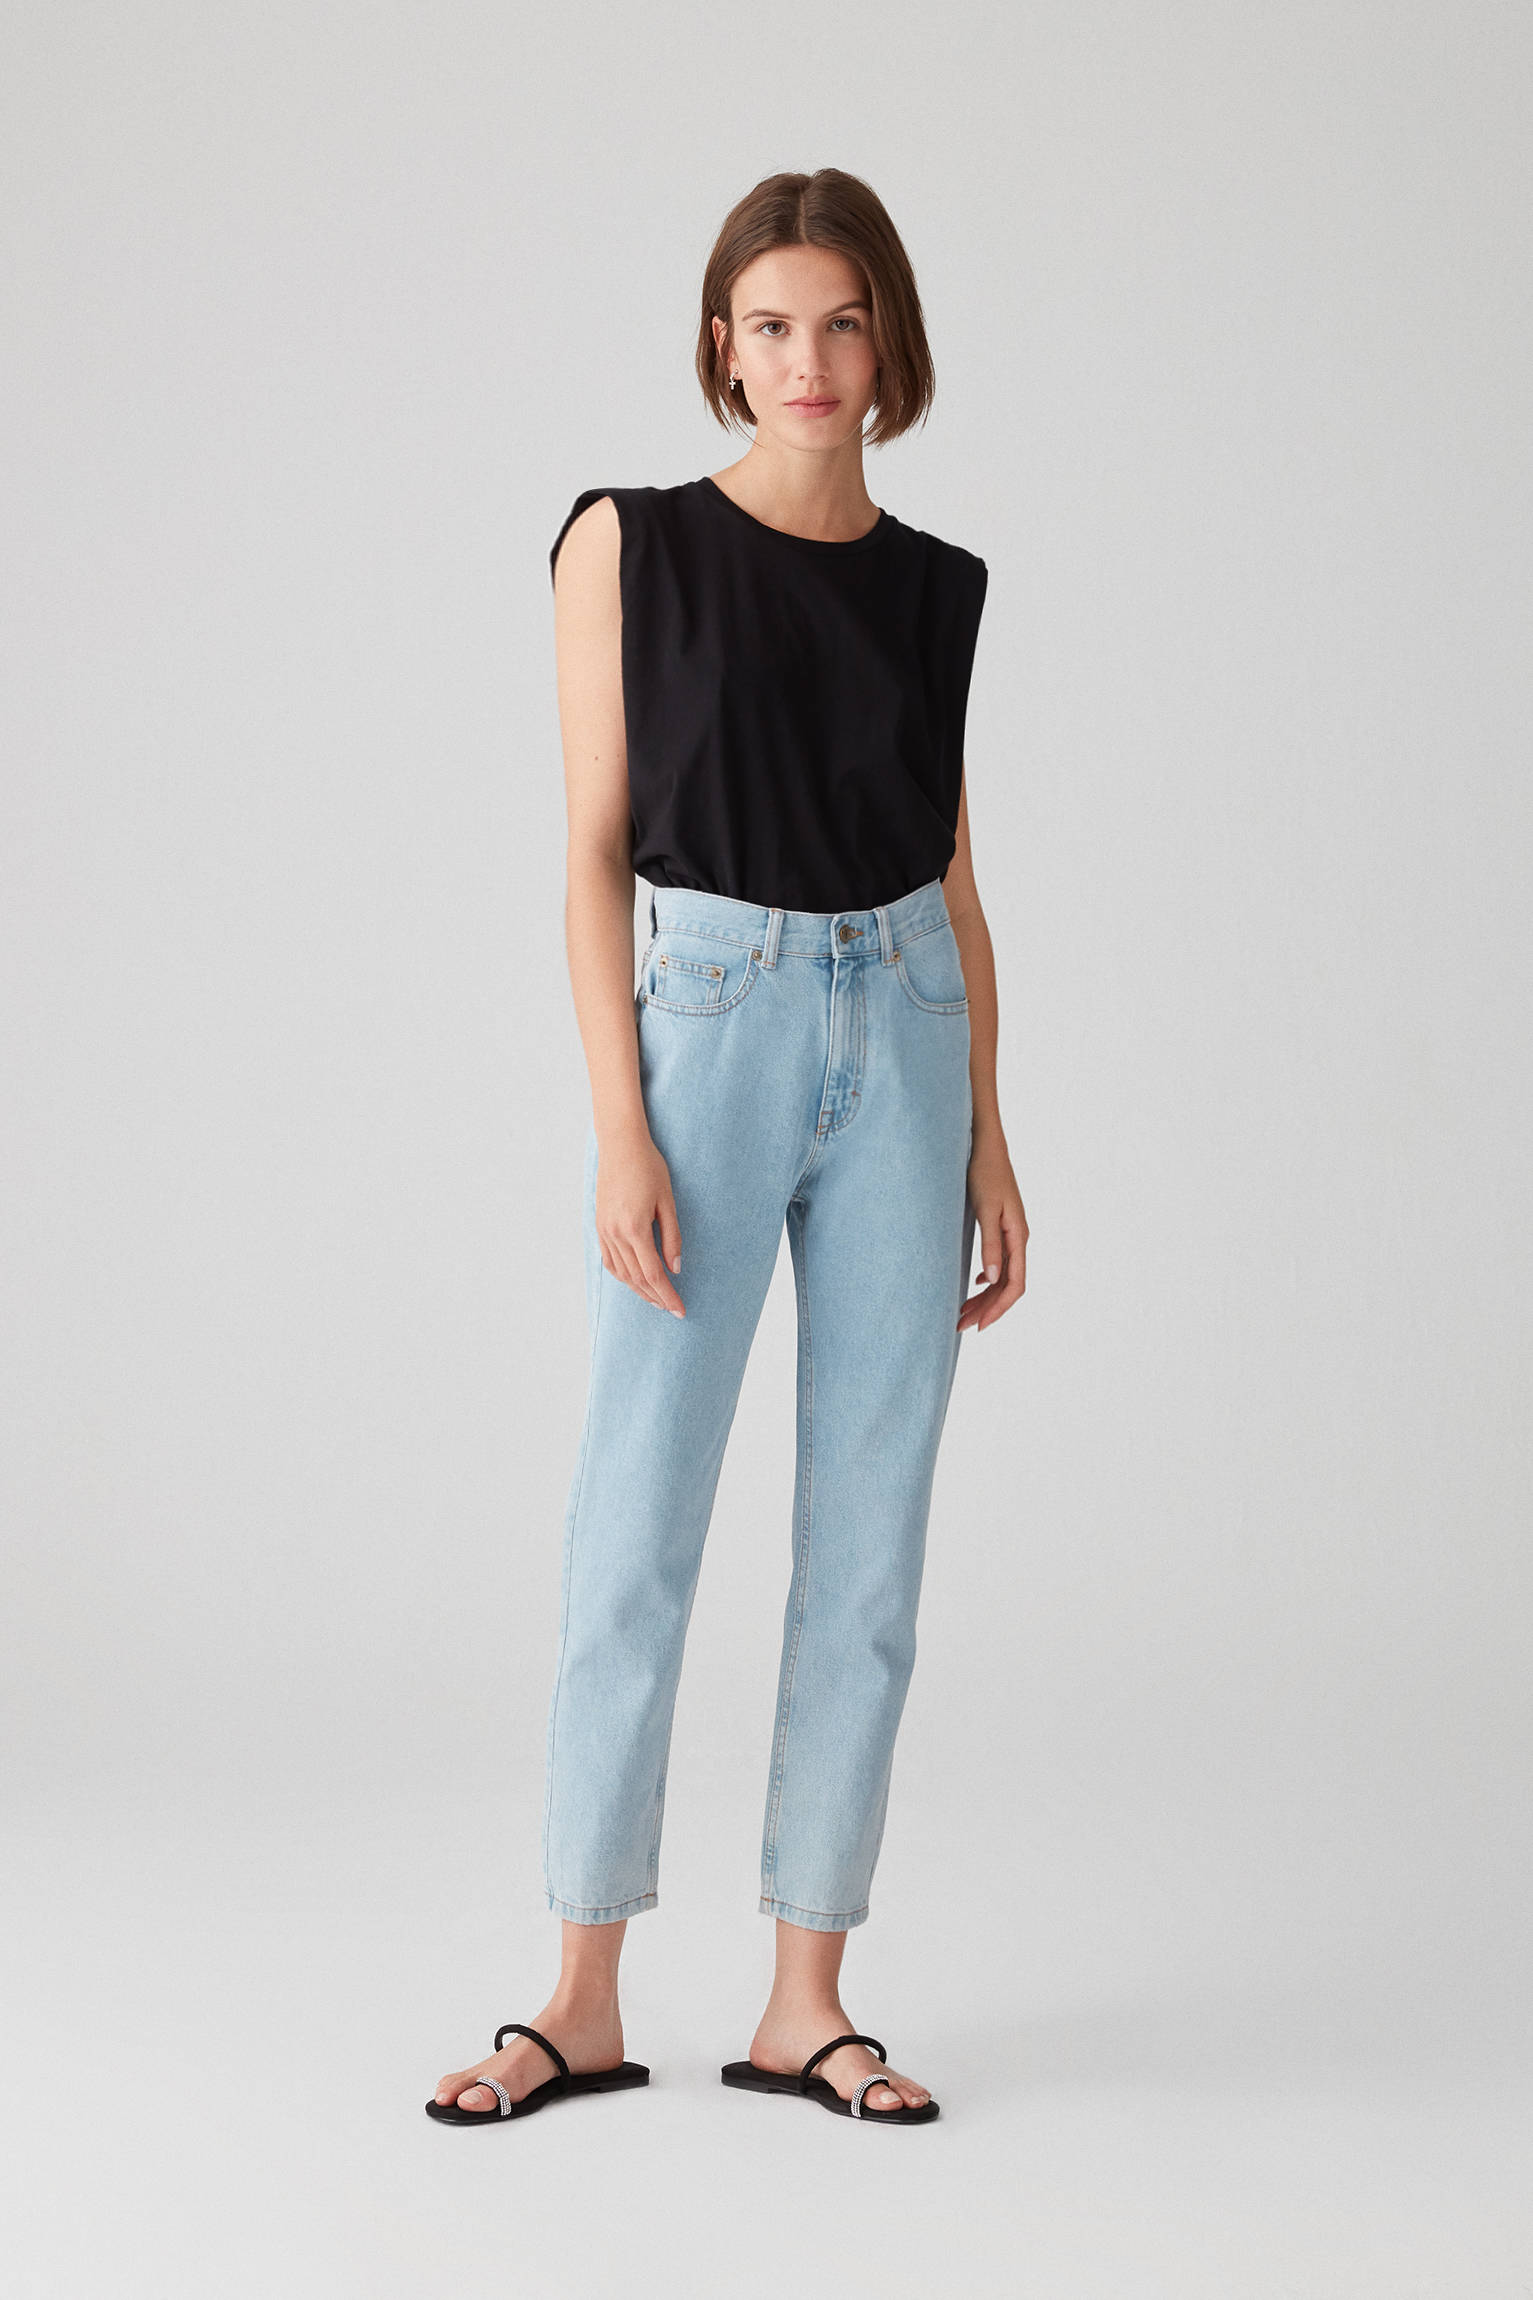 pull and bear basic mom jeans